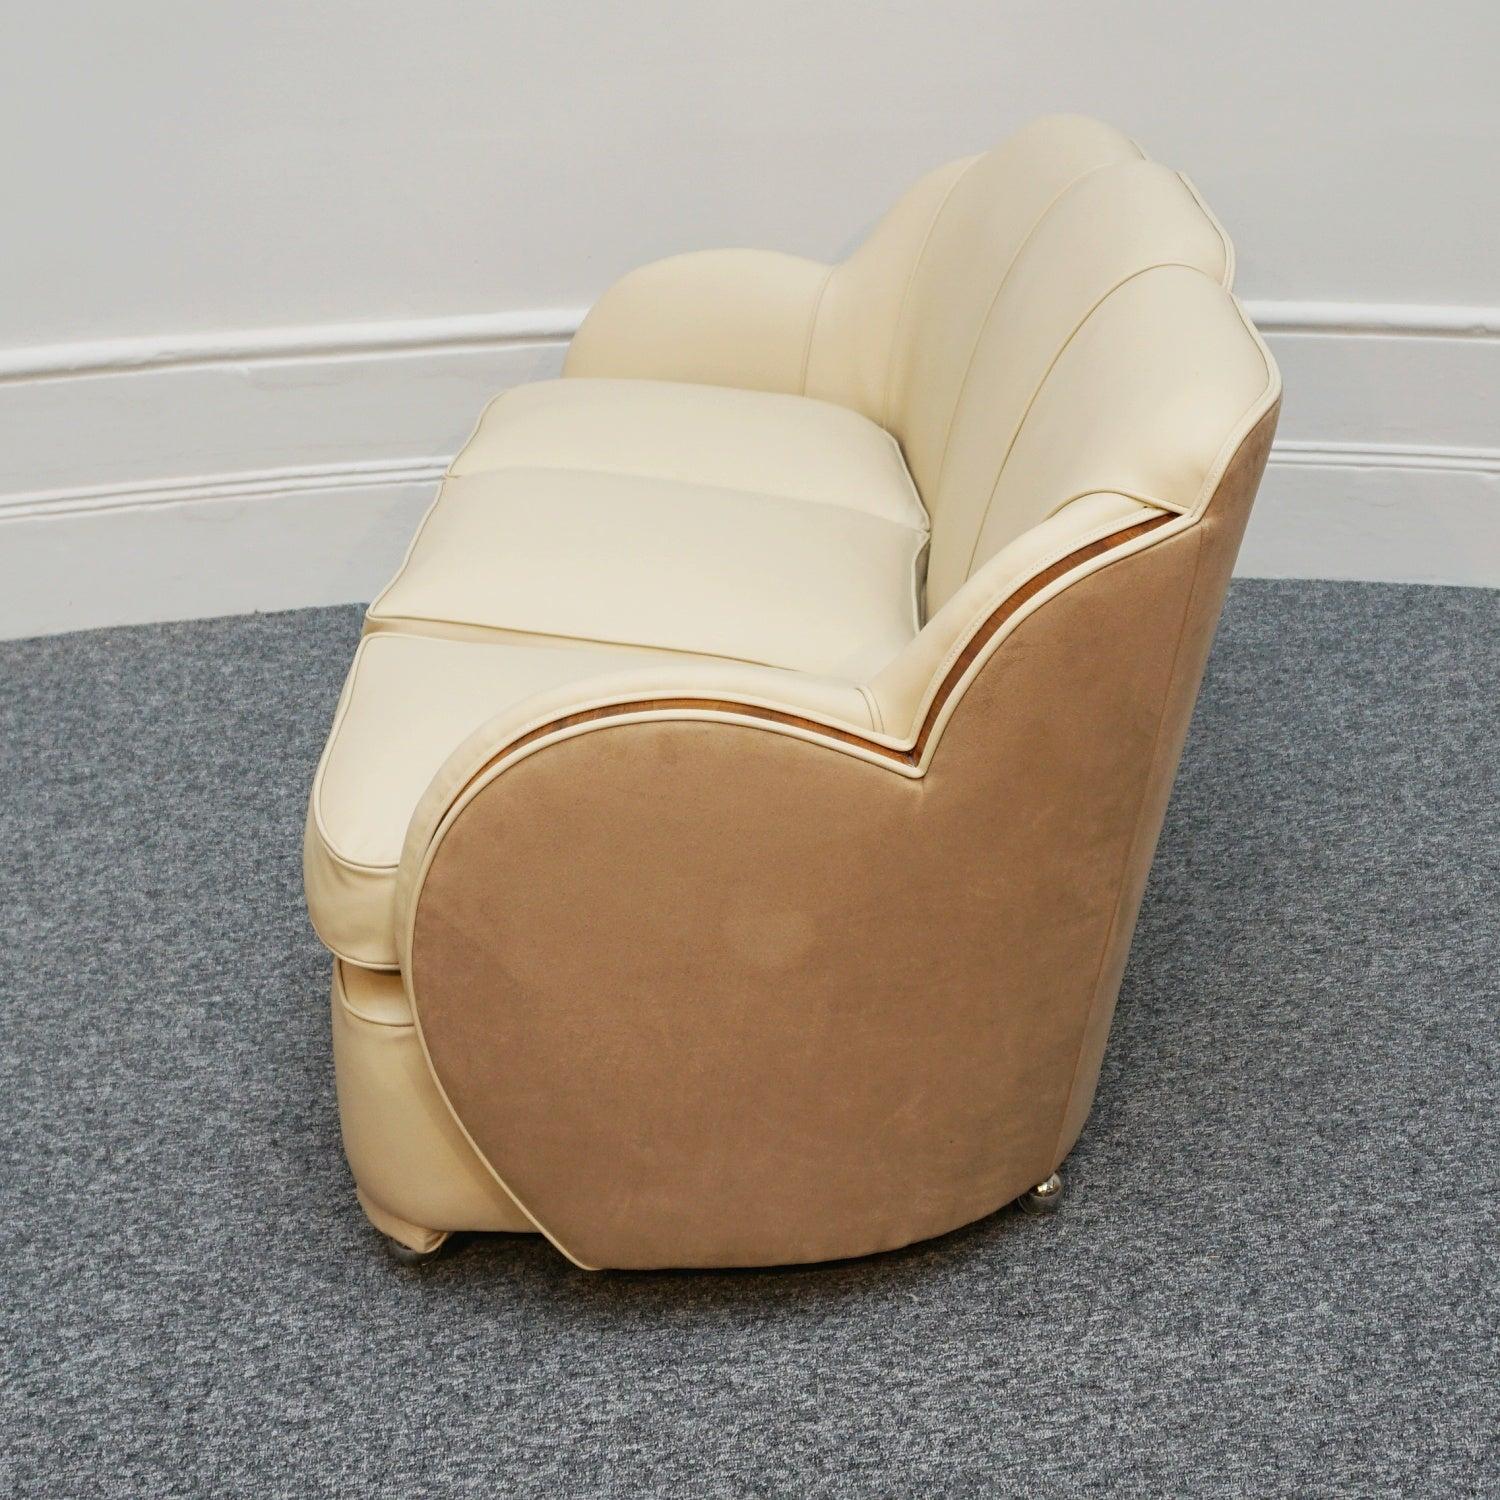 Art Deco Cloud Sofa Re-Upholstered in Cream Leather with Walnut Banding 7